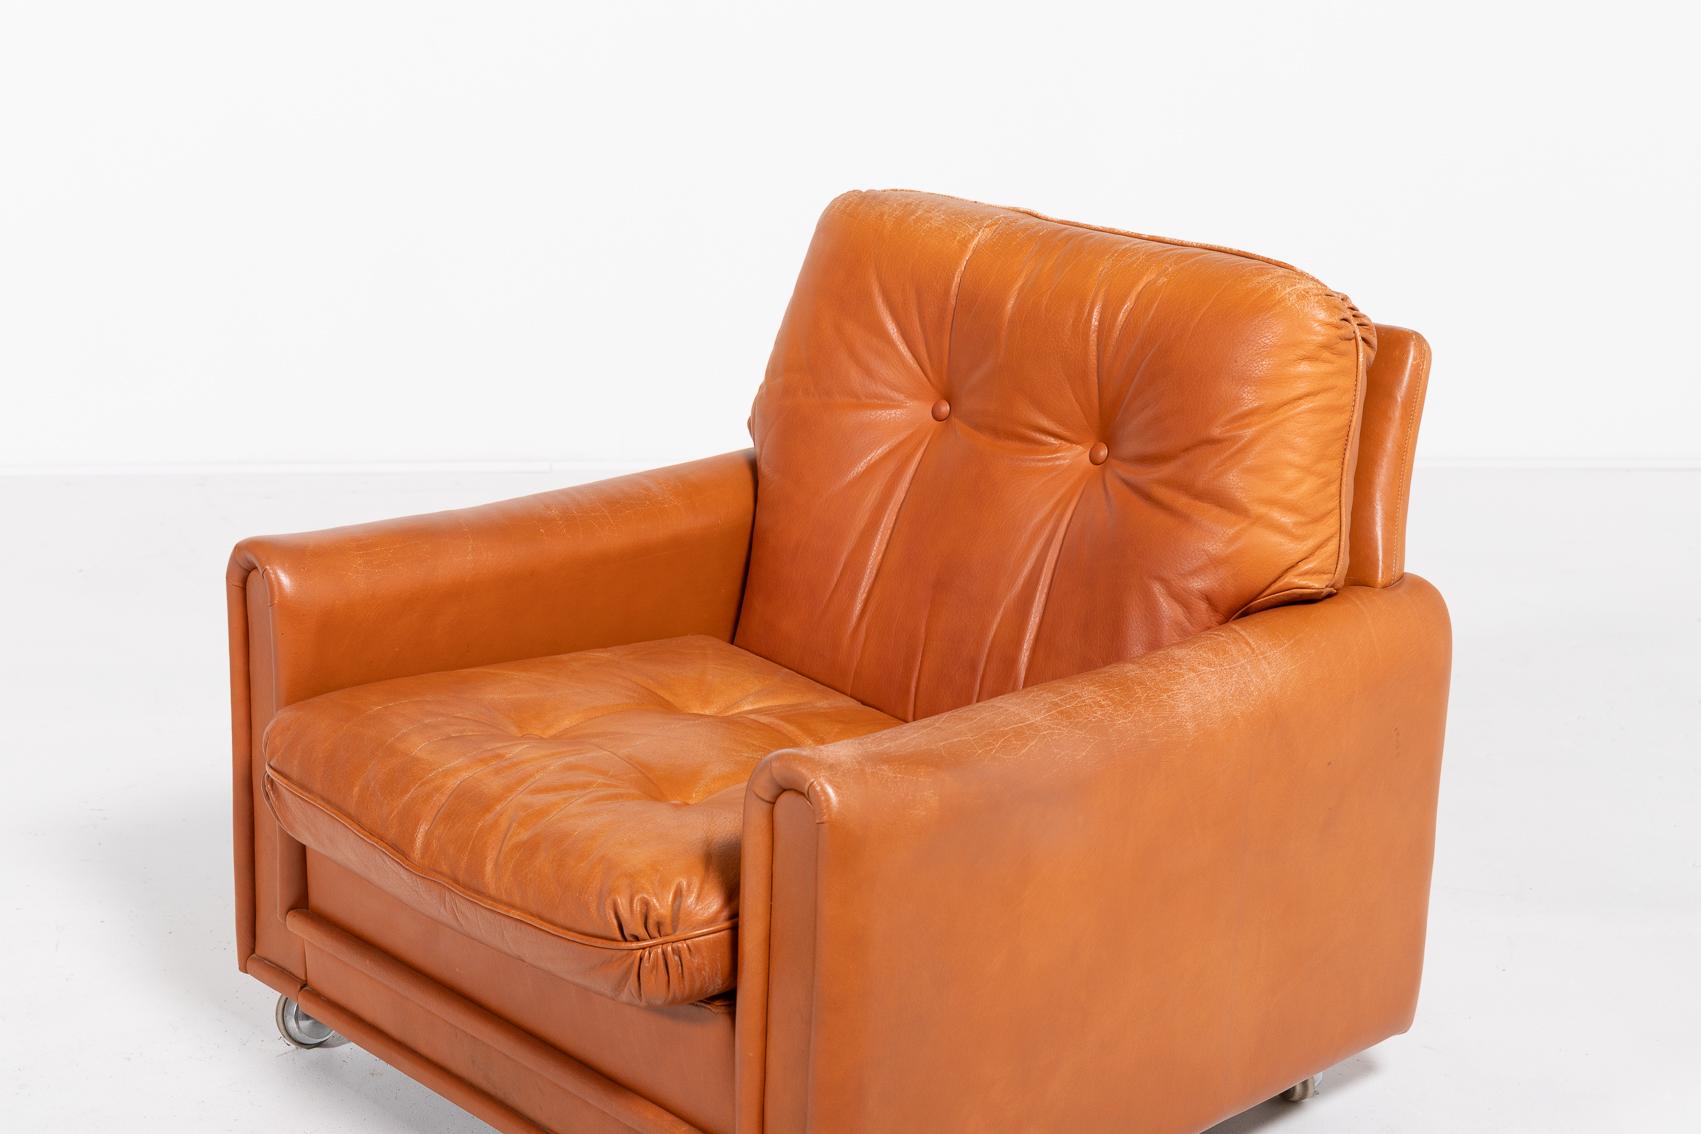 Danish Modern pair of lounge armchairs produced in 1960’s. The armchairs are upholstered in cognac leather, equipped with wheels.

Condition
Good, age related wear and patina

Dimensions
width: 80 cm.
height: 76 cm
depth: 83 cm
seat height: 38 cm